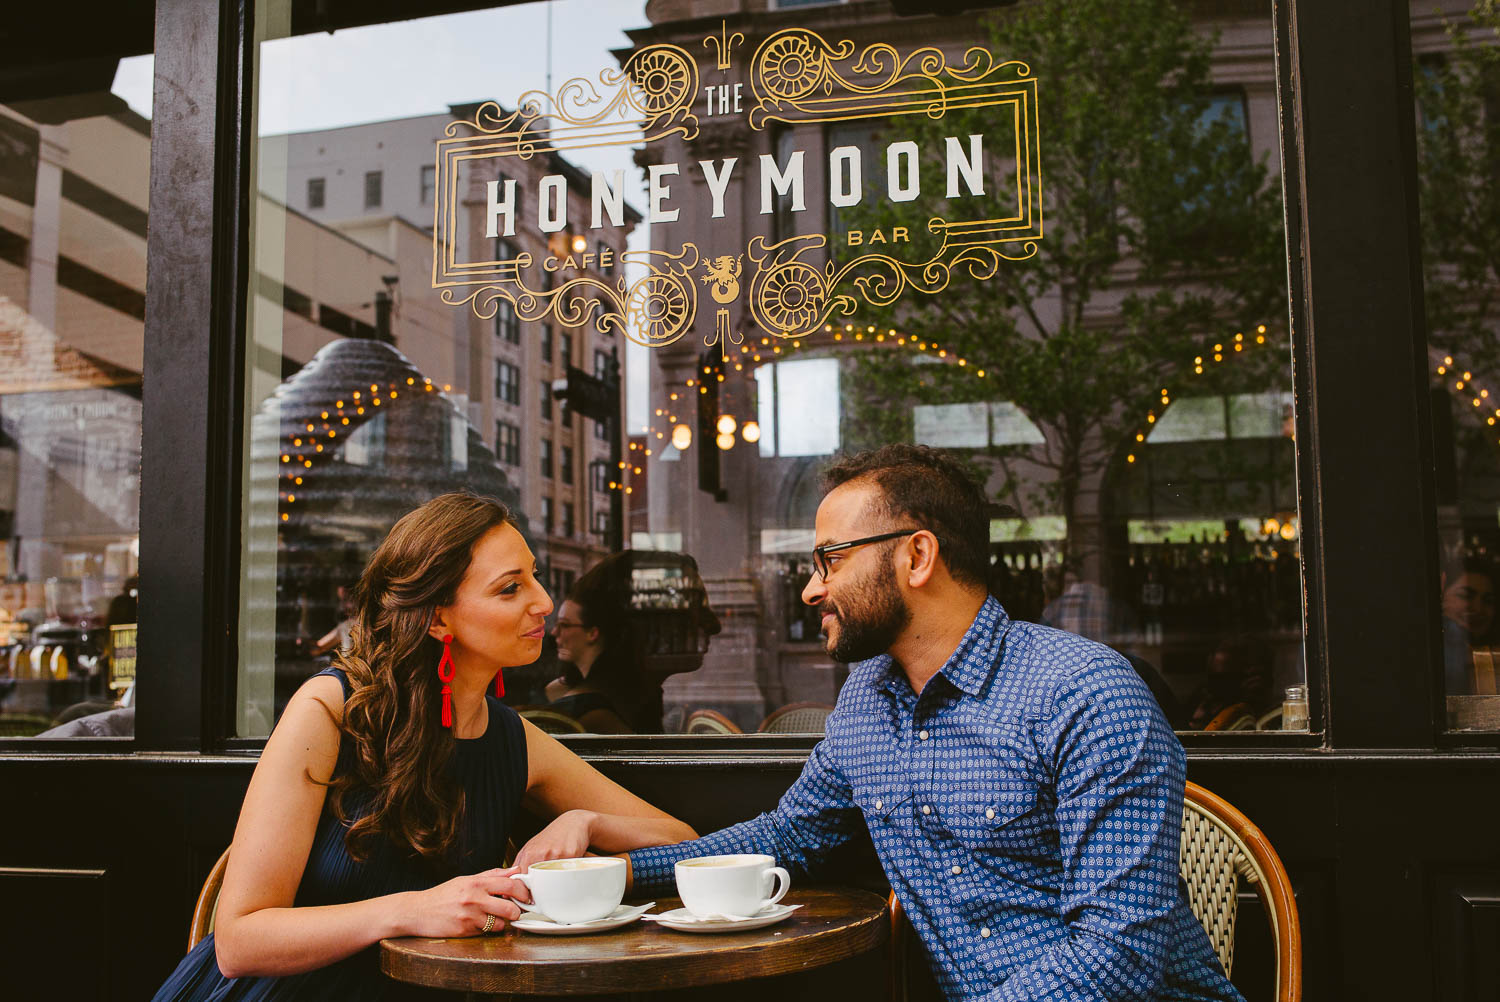 Honeymoon Cafe Engagement Session in Houston Texas